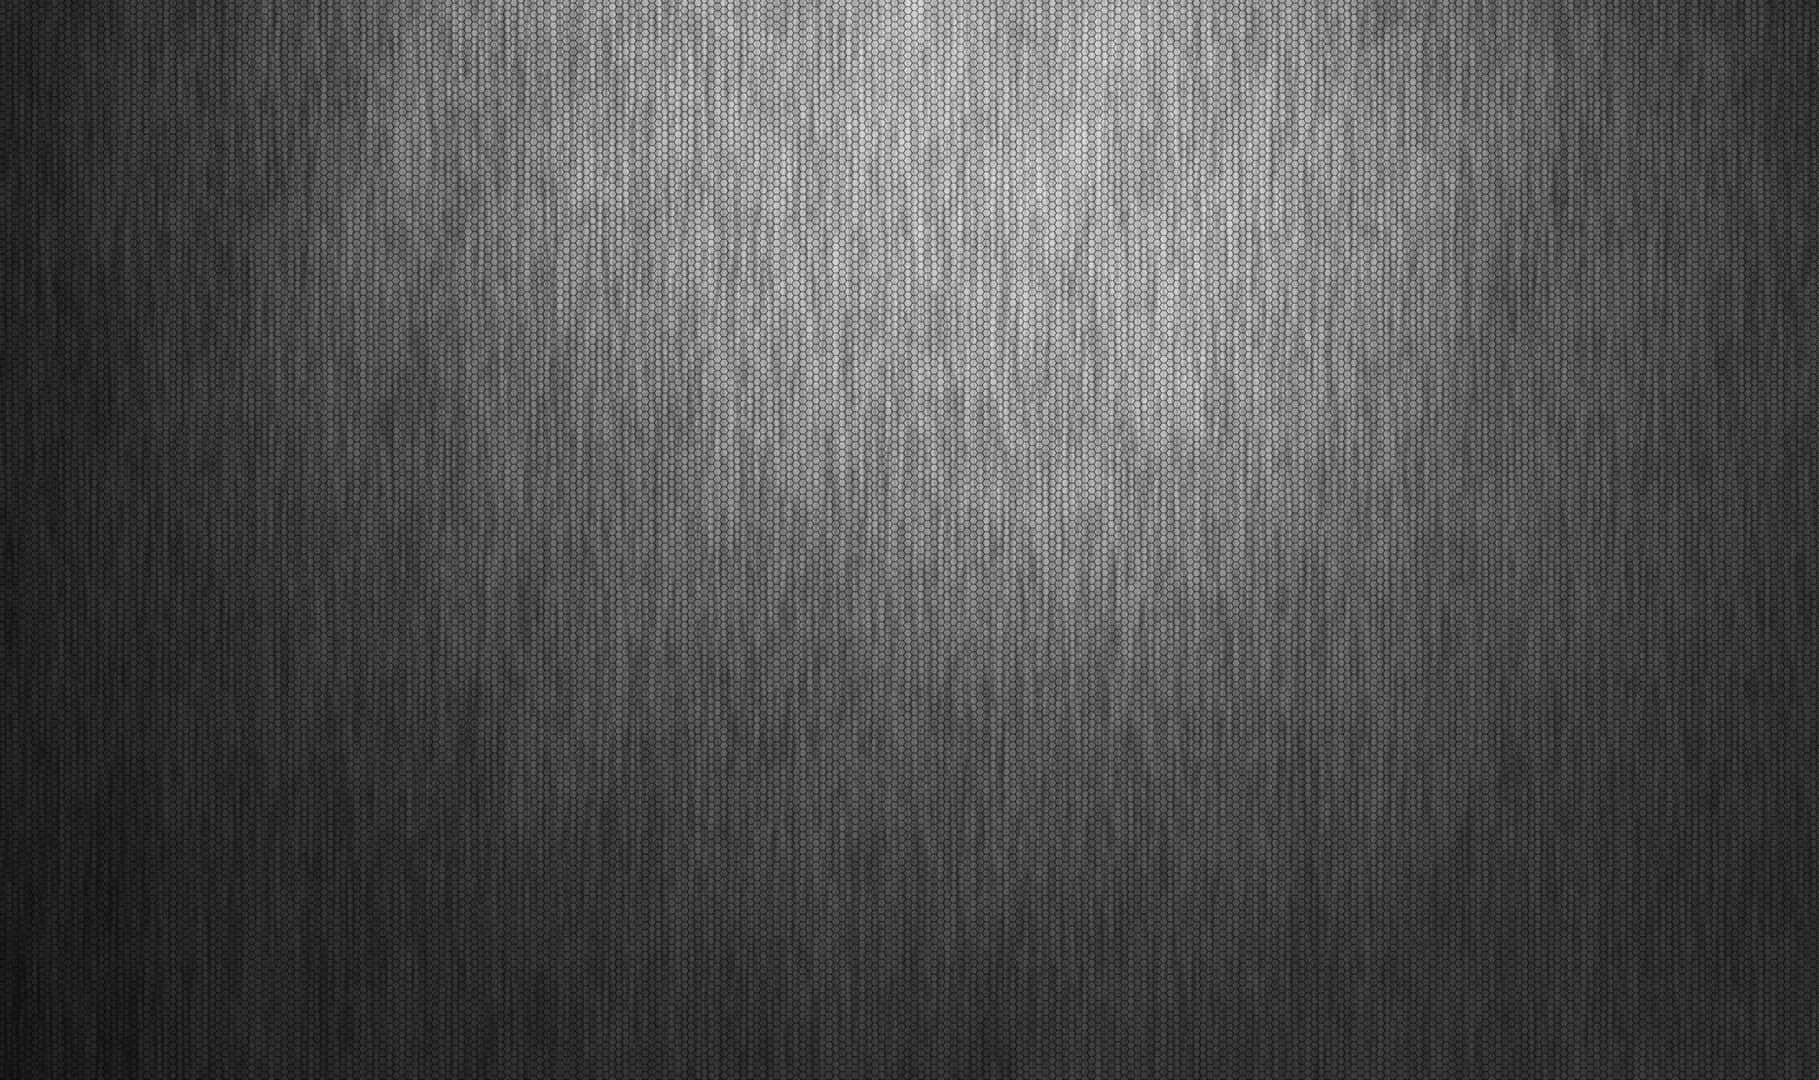 A Black And White Metal Texture Background